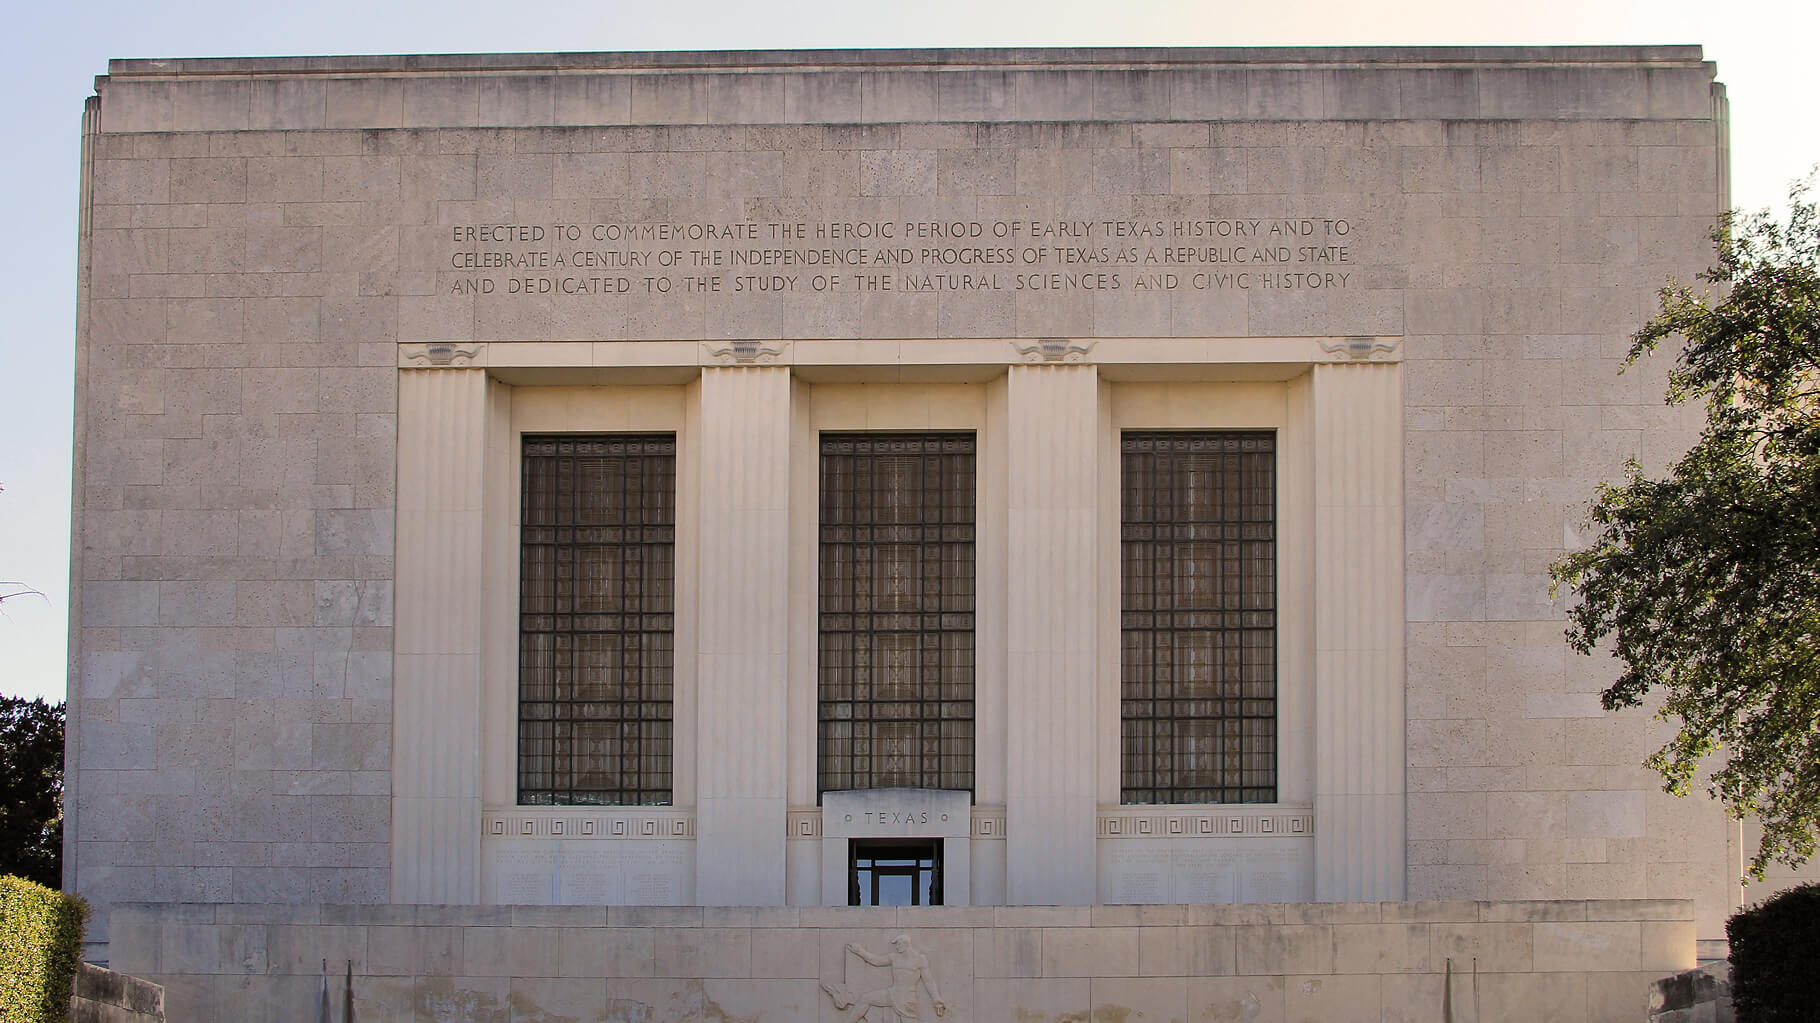 Exterior view of Texas Memorial Museum / Wikimedia Commons / Larry D. Moore
Link: https://commons.wikimedia.org/wiki/File:Texas_memorial_museum_west_elevation.jpg